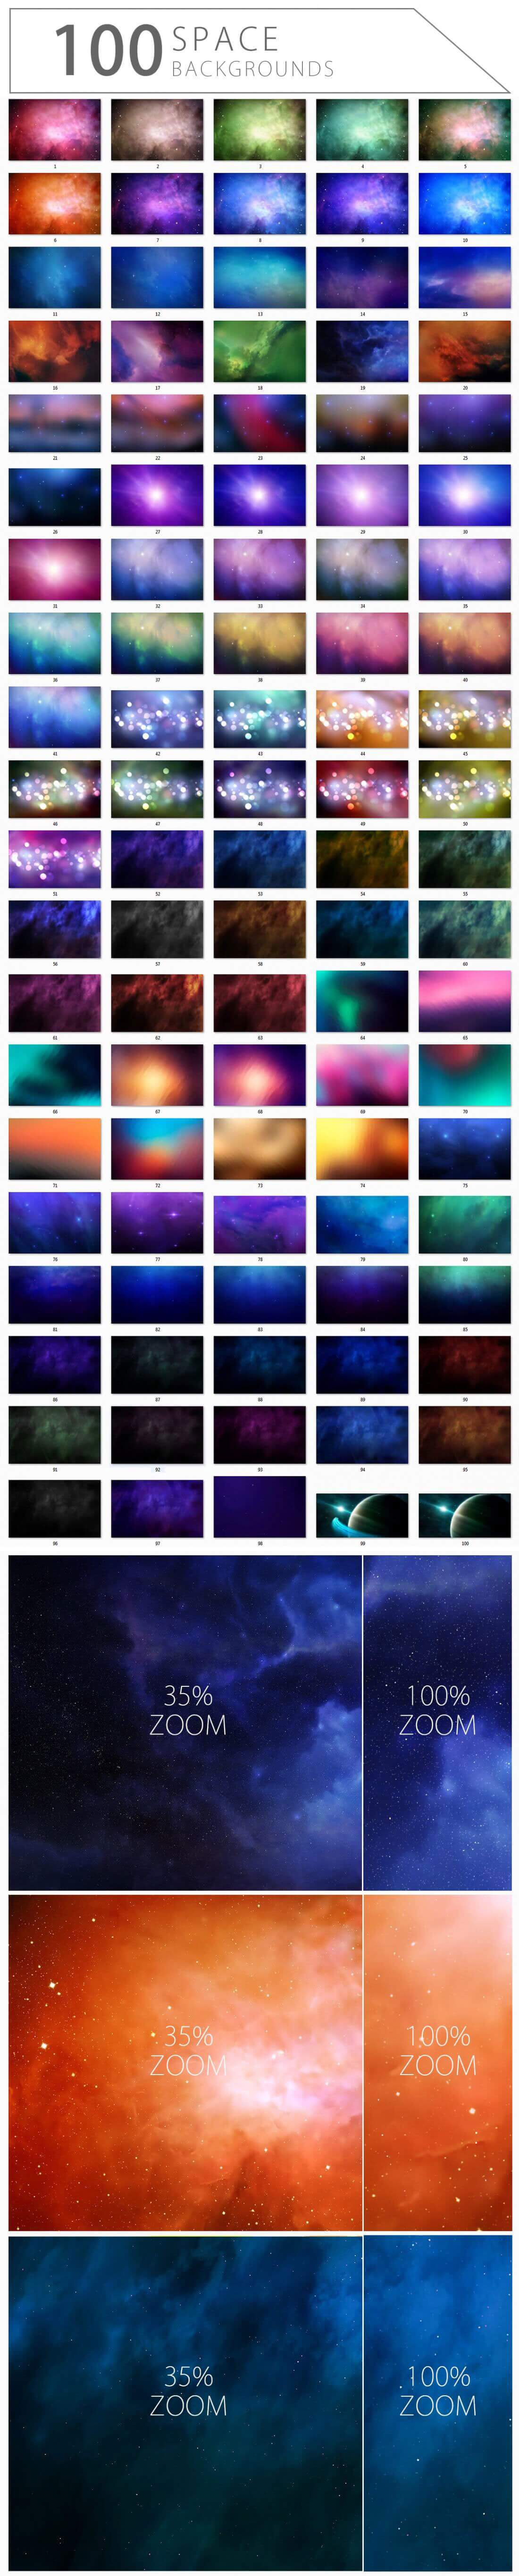 100-Space-Backgrounds-prevA